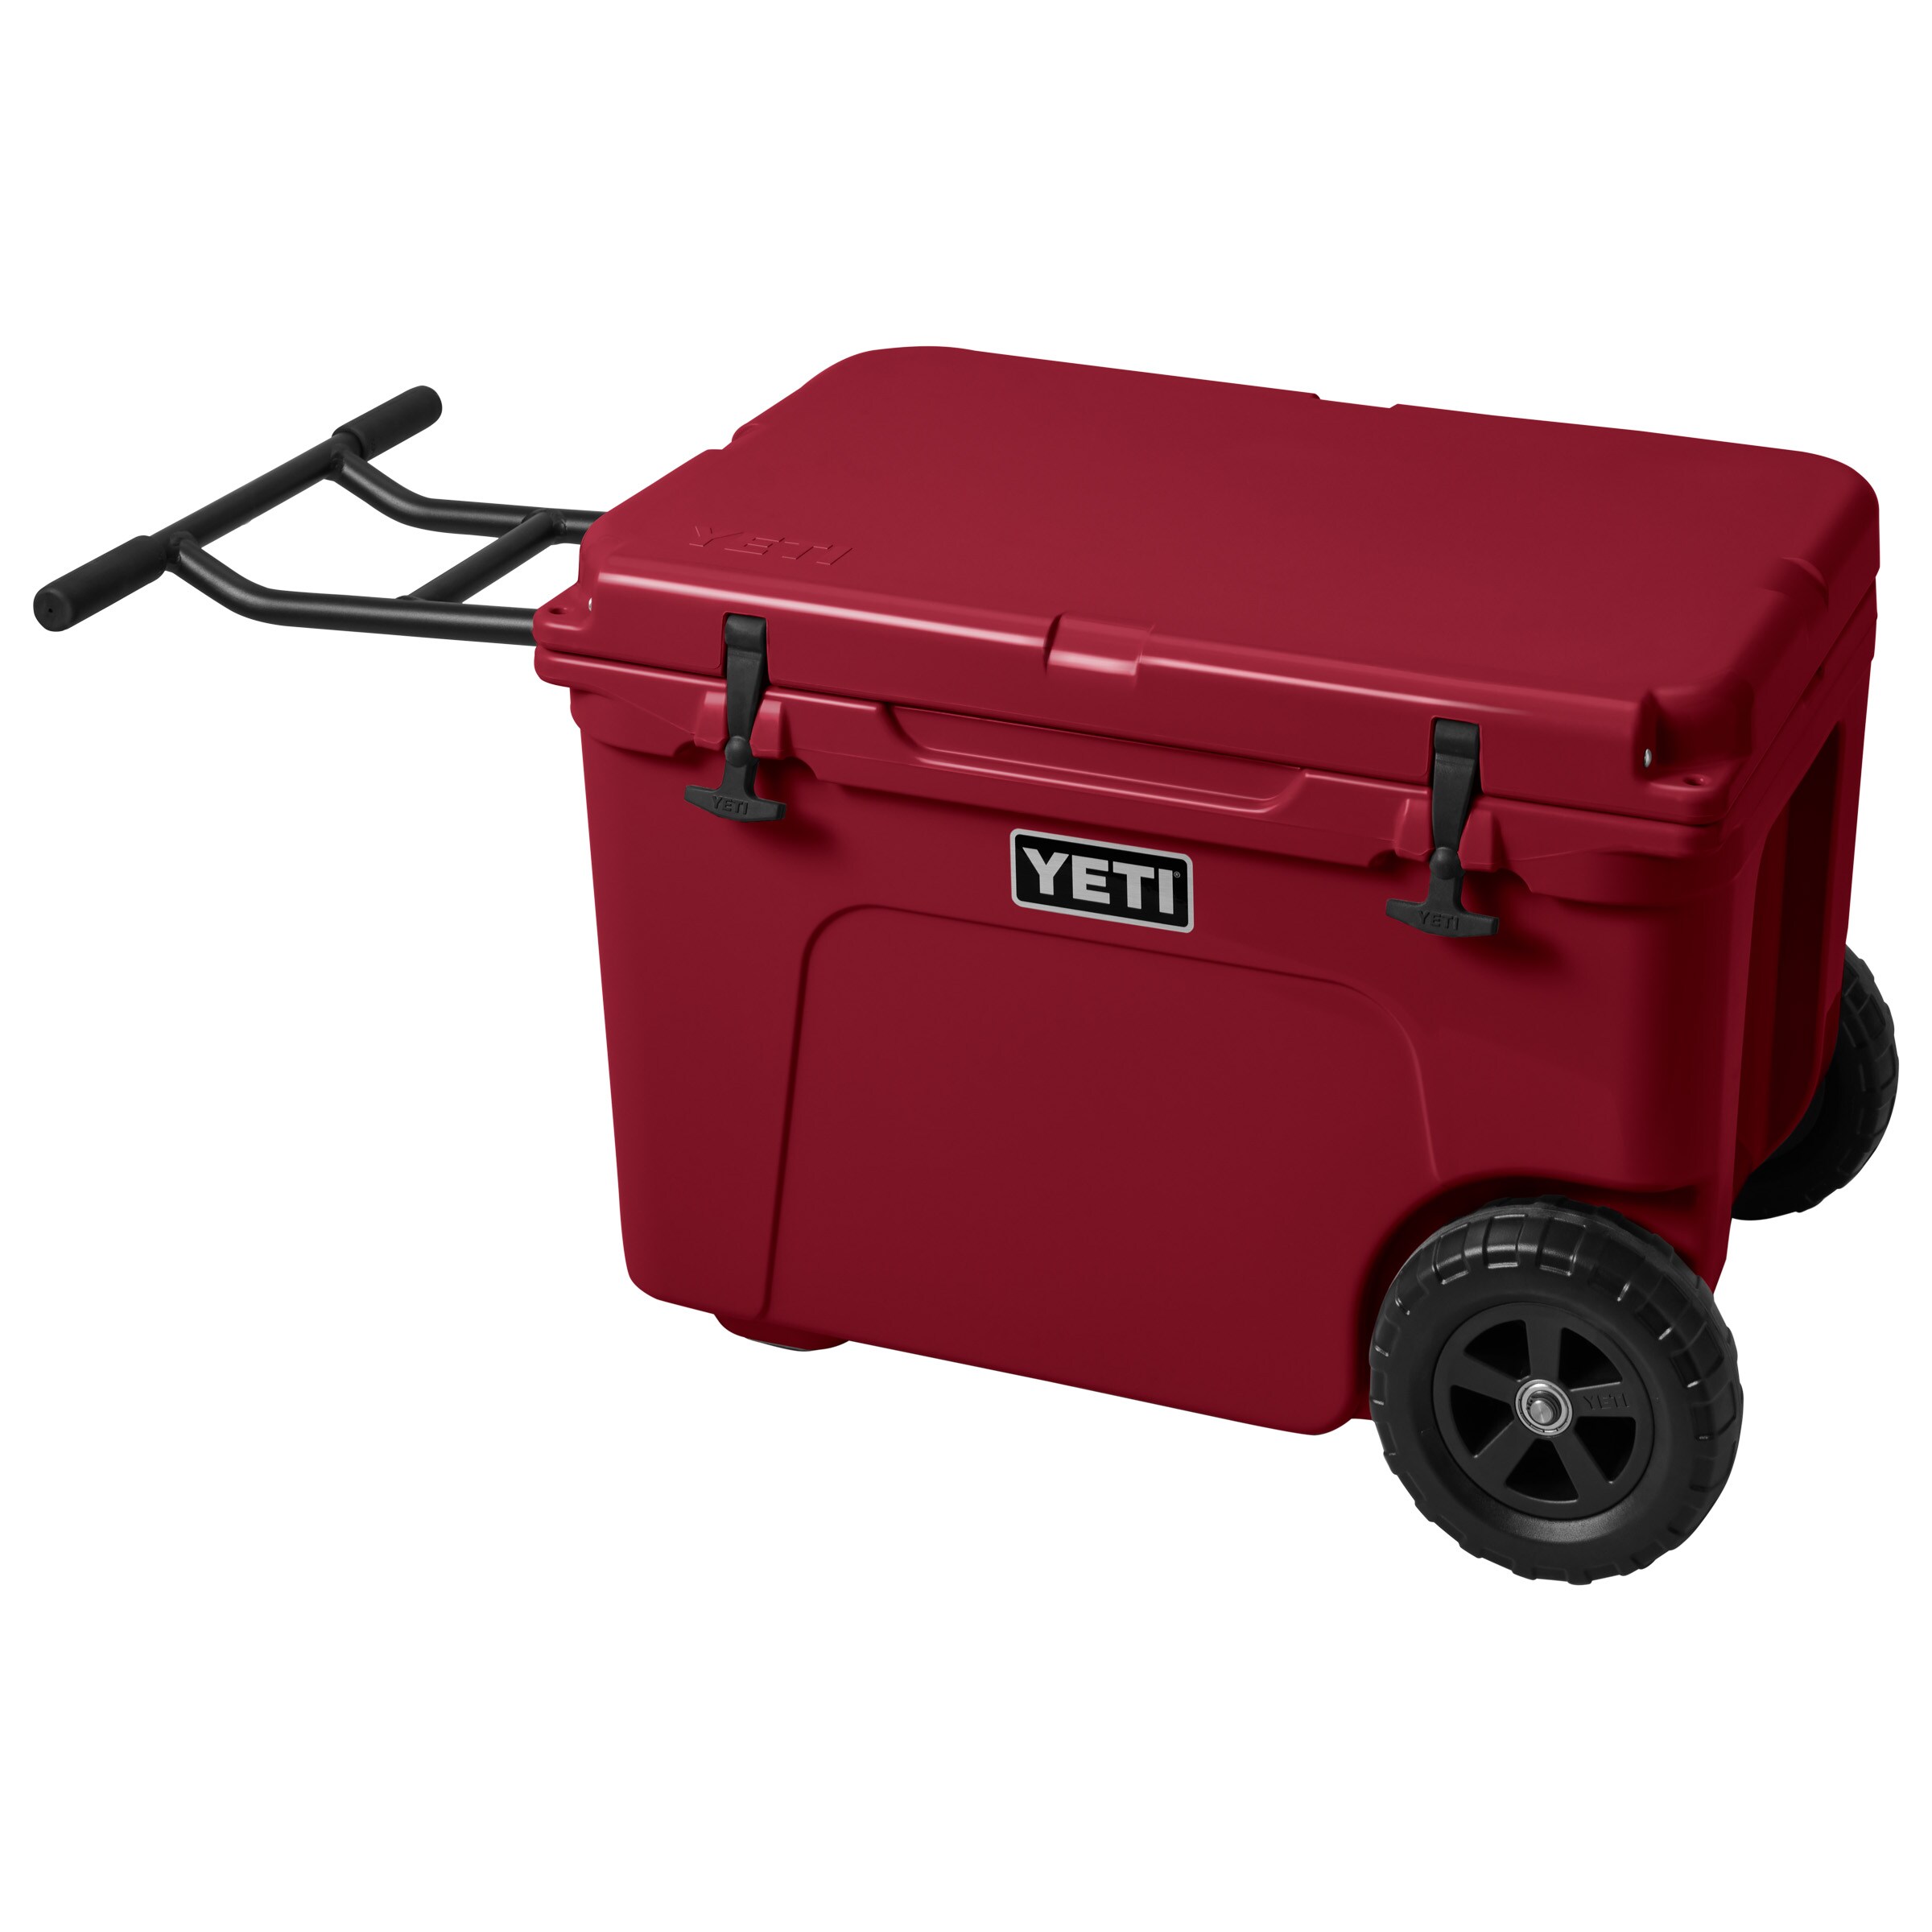 YETI Tundra Haul Wheeled Insulated Chest Cooler, Harvest Red at 